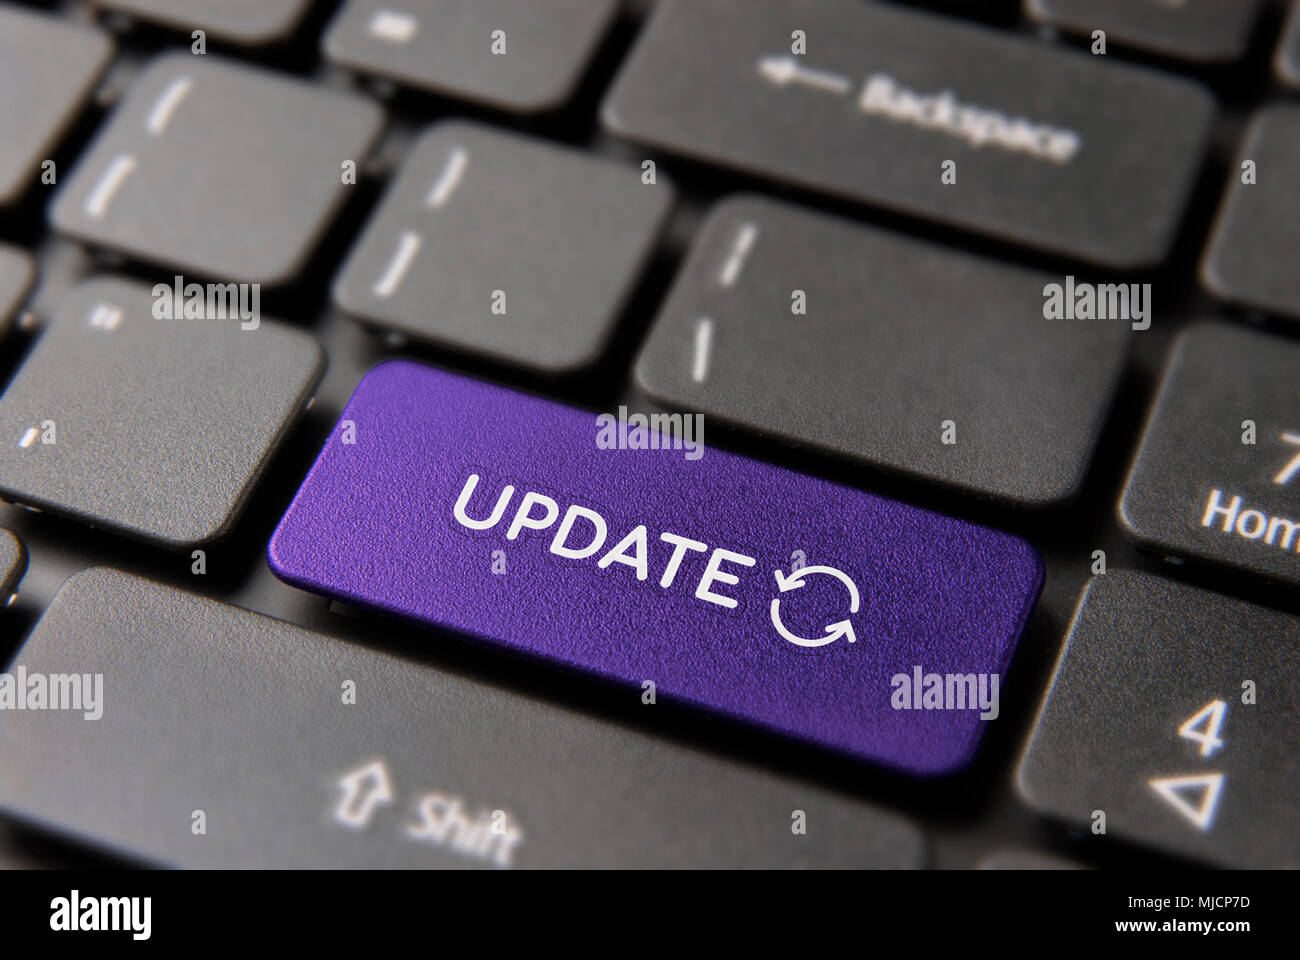 Online system update concept: color key button with updating process symbol on computer keyboard. Stock Photo